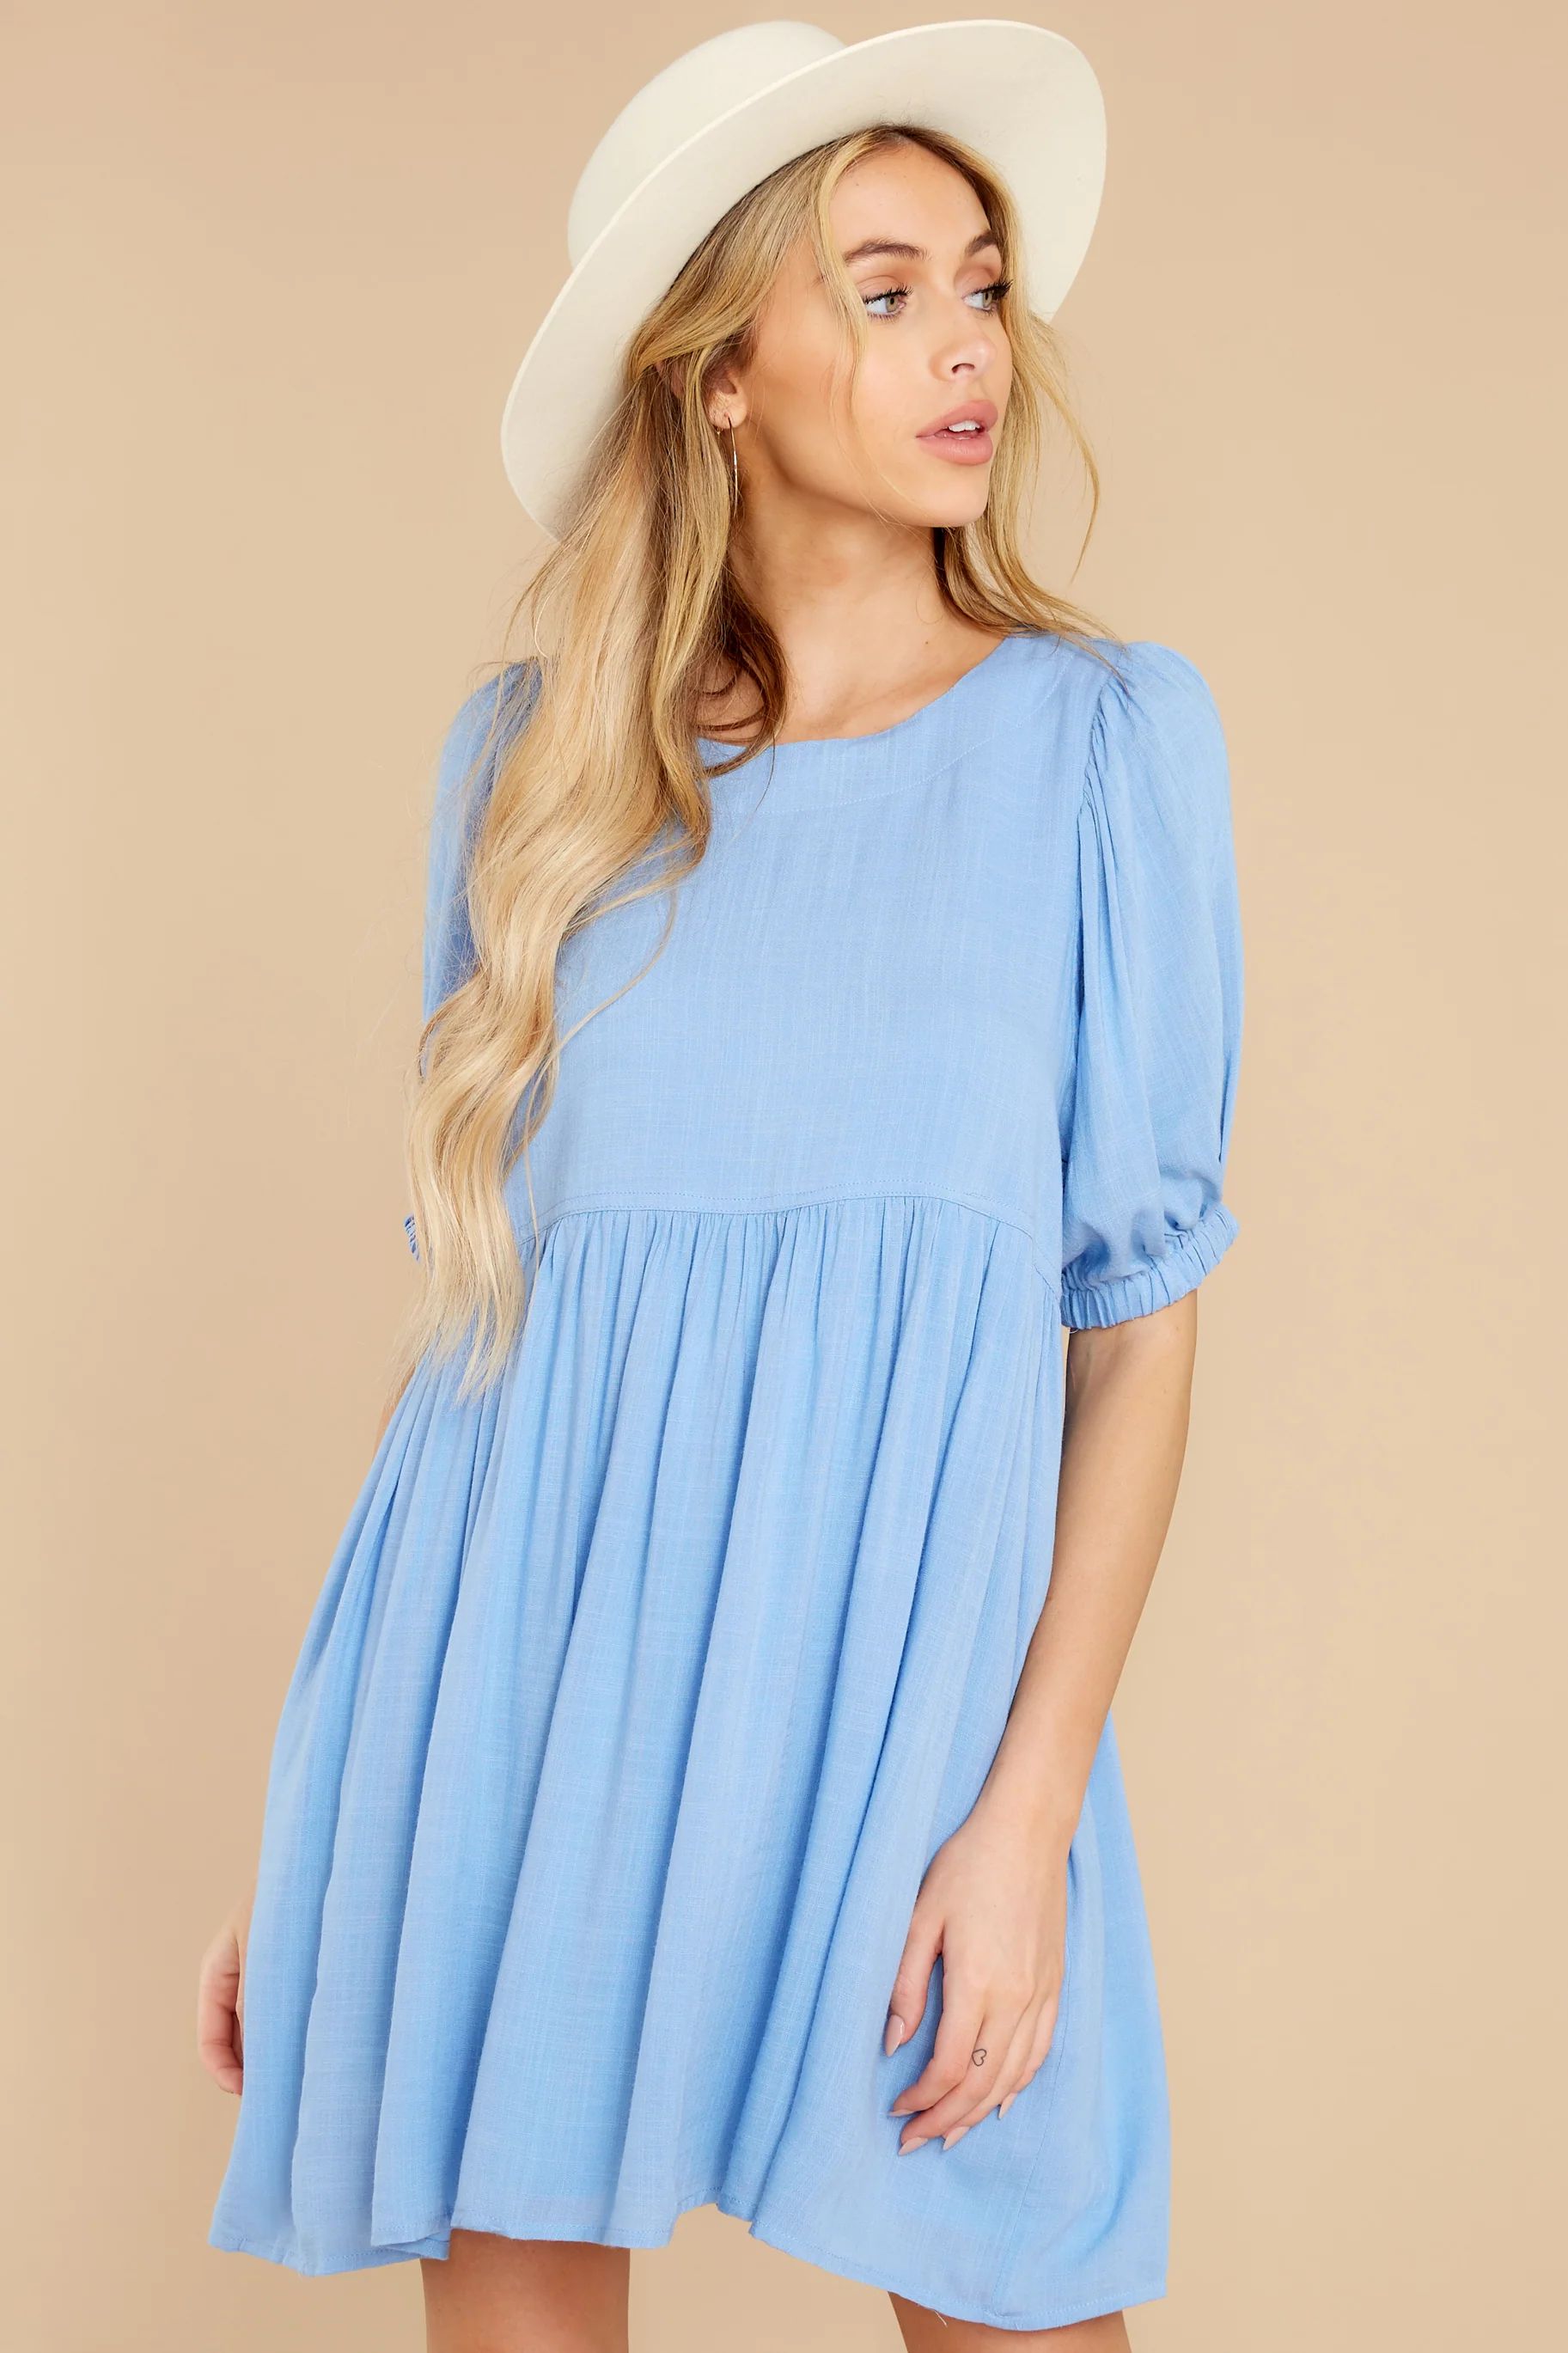 Tally The Compliments Misty Blue Dress | Red Dress 